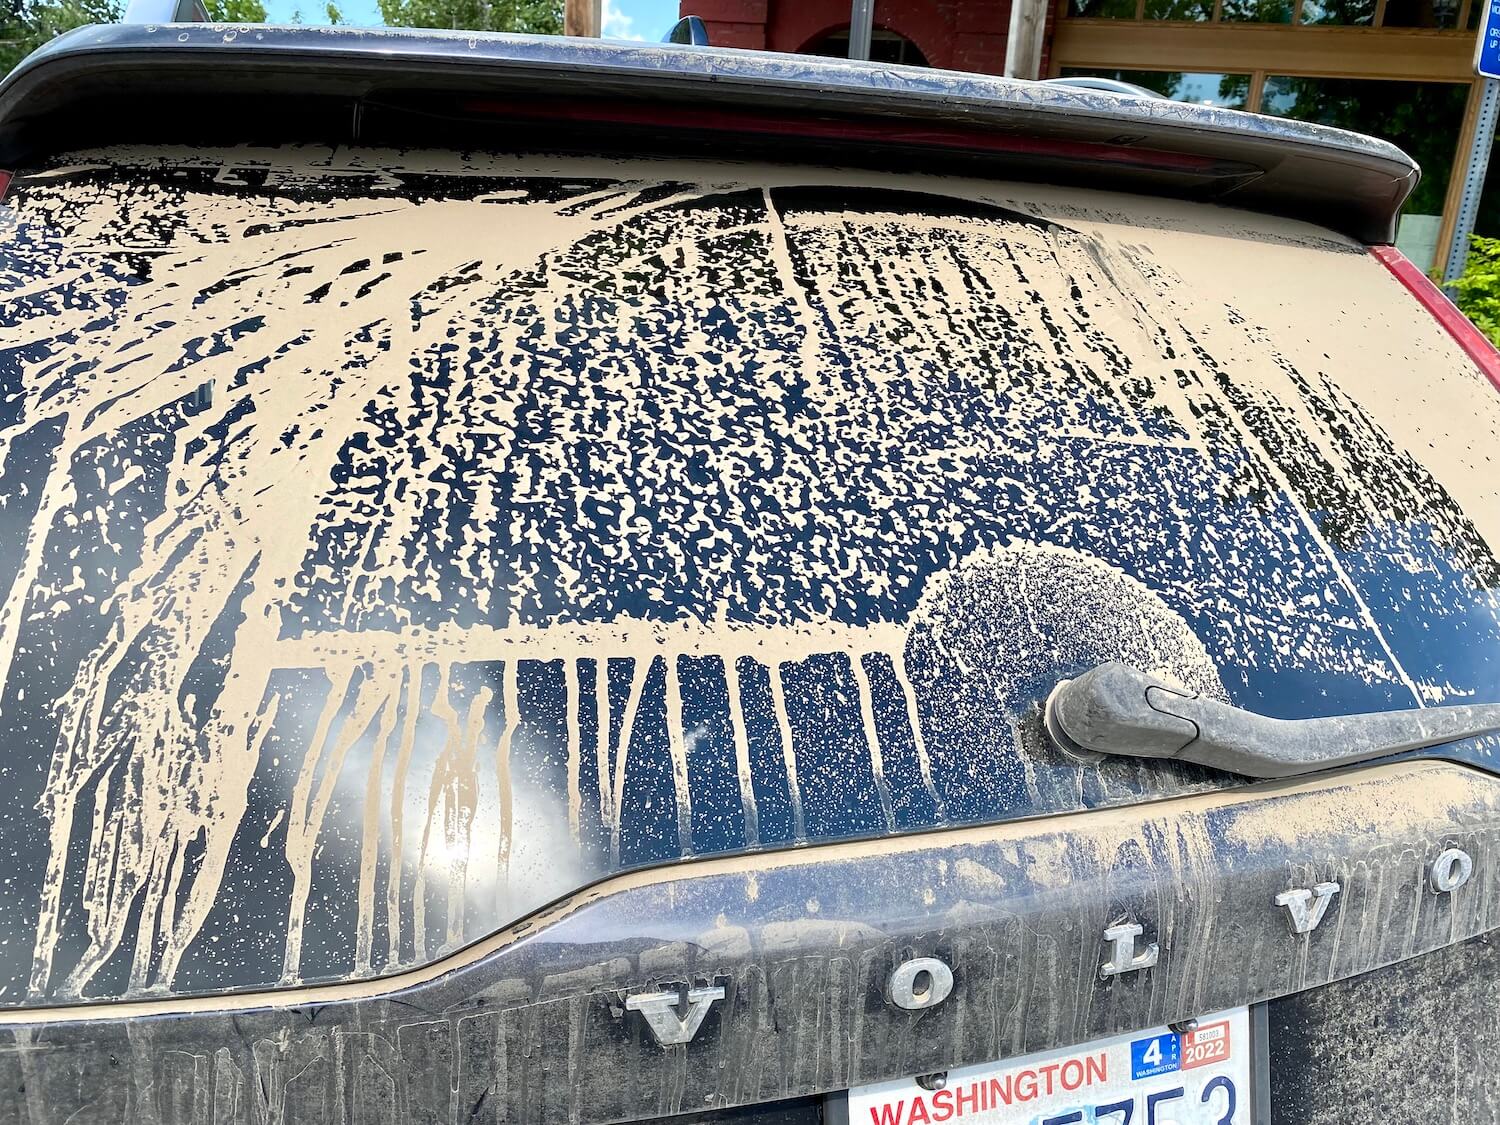 The back window of a Volvo is covered in mud and dust and the outline of the rear wiper seems to have made a trace through the brown goop.  A piece of a Washington license plate can be seen. 